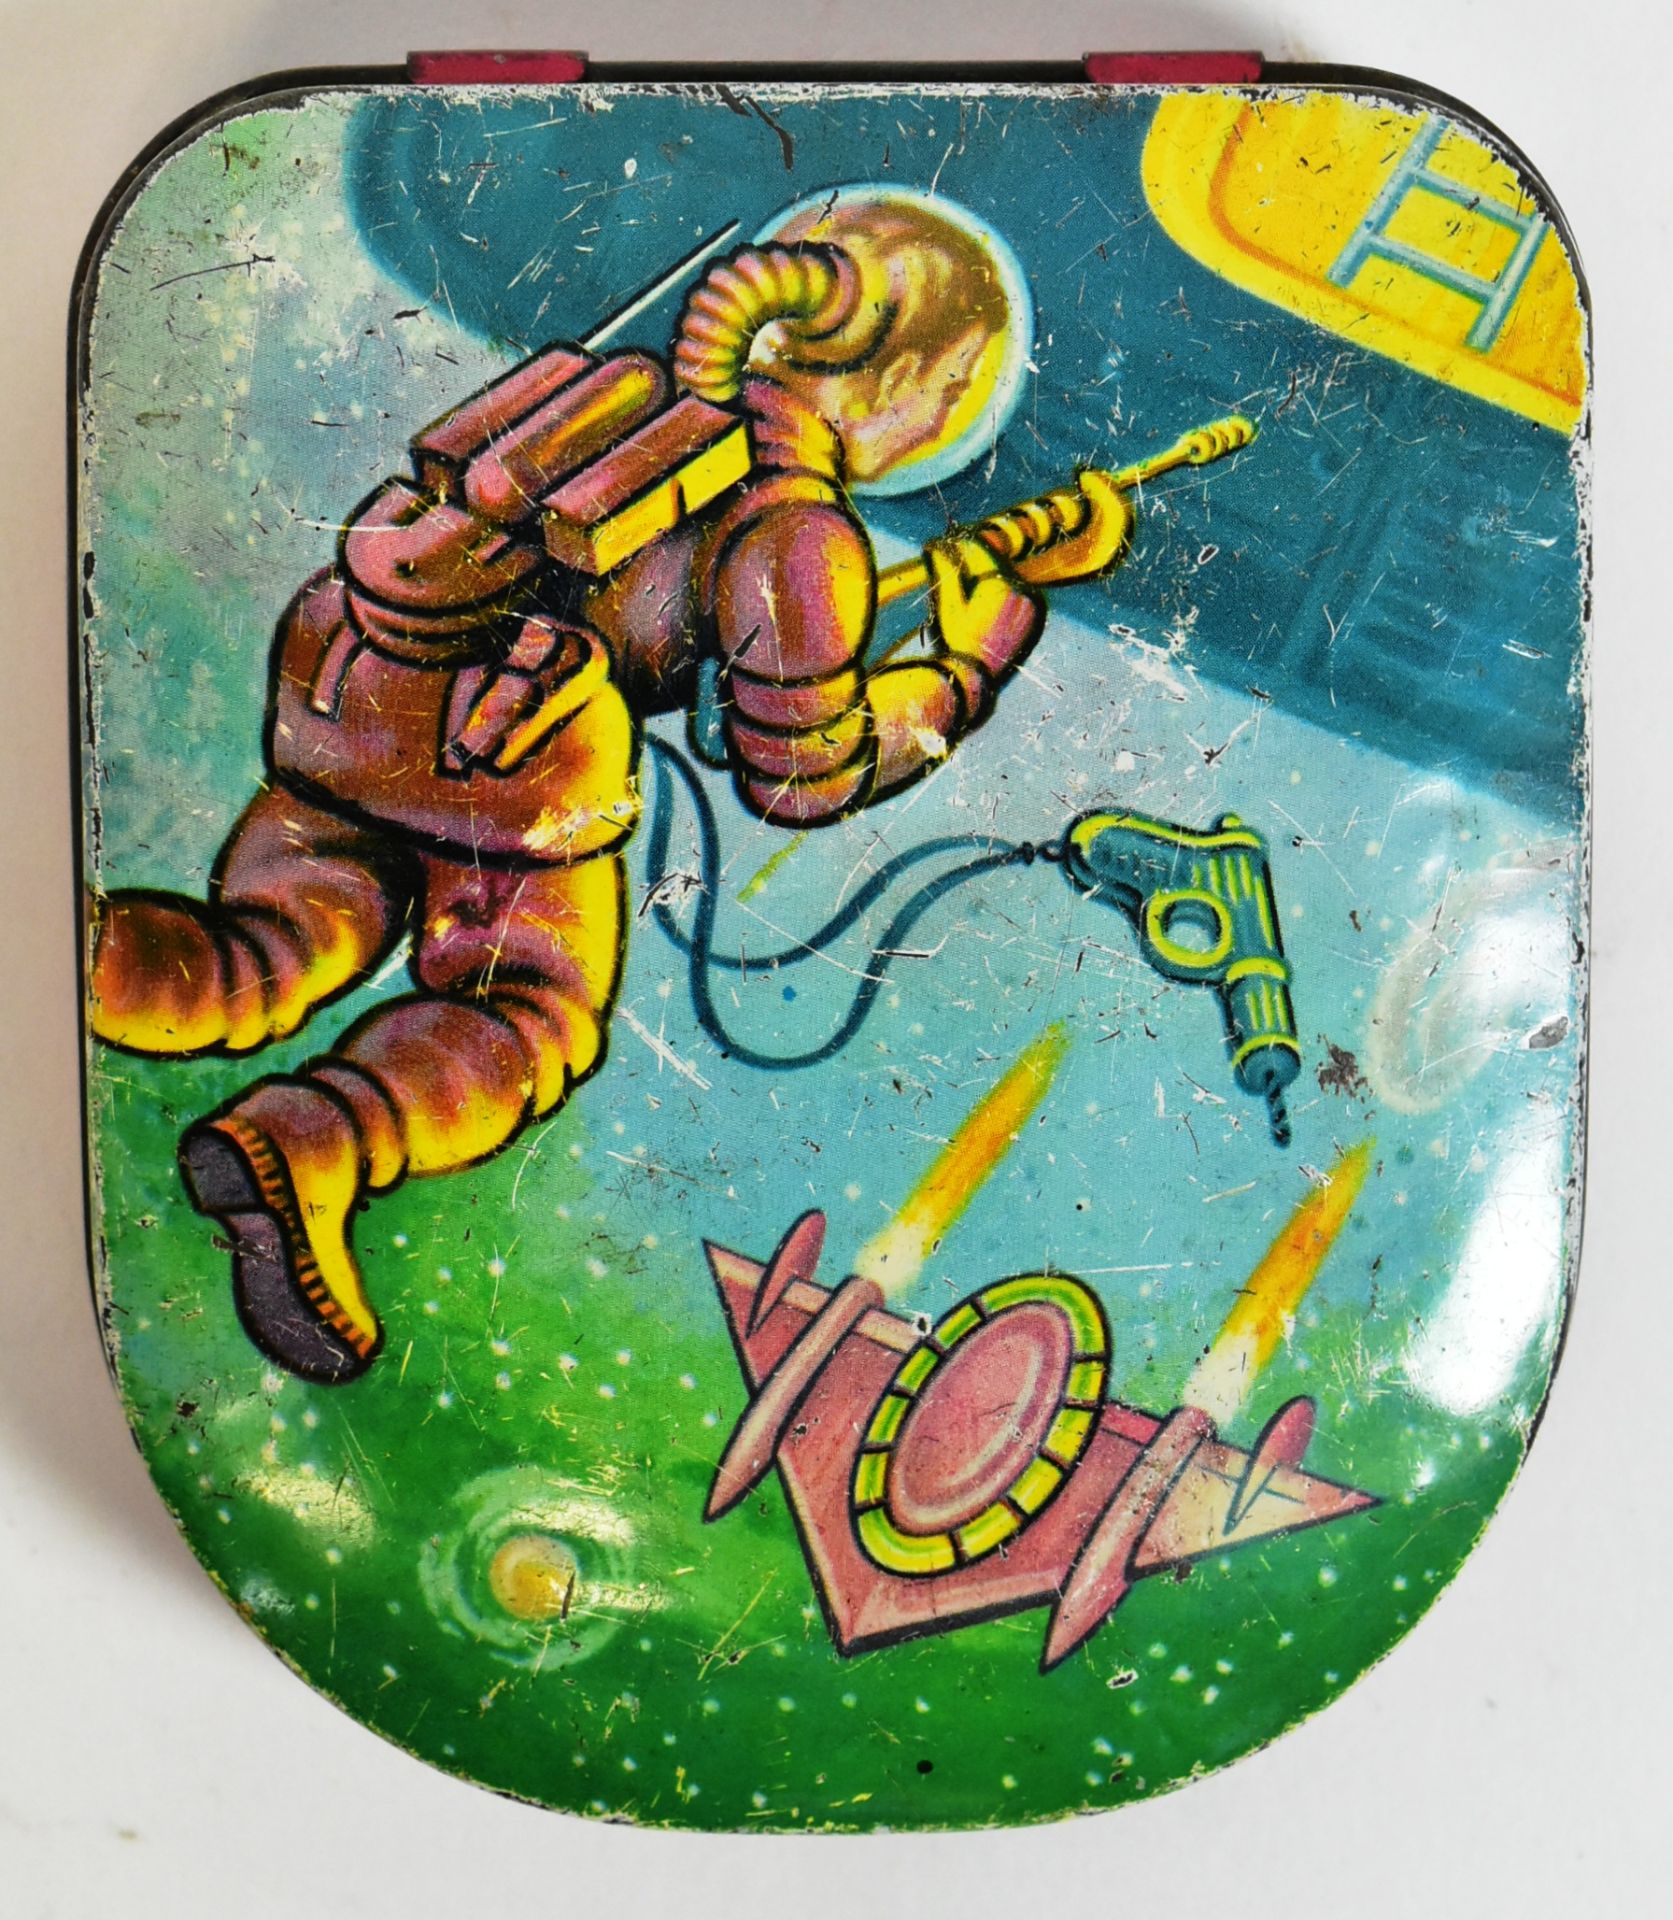 1950S SPACE SCIENCE FICTION - EDWARD SHARP & SONS TINS - Image 4 of 6